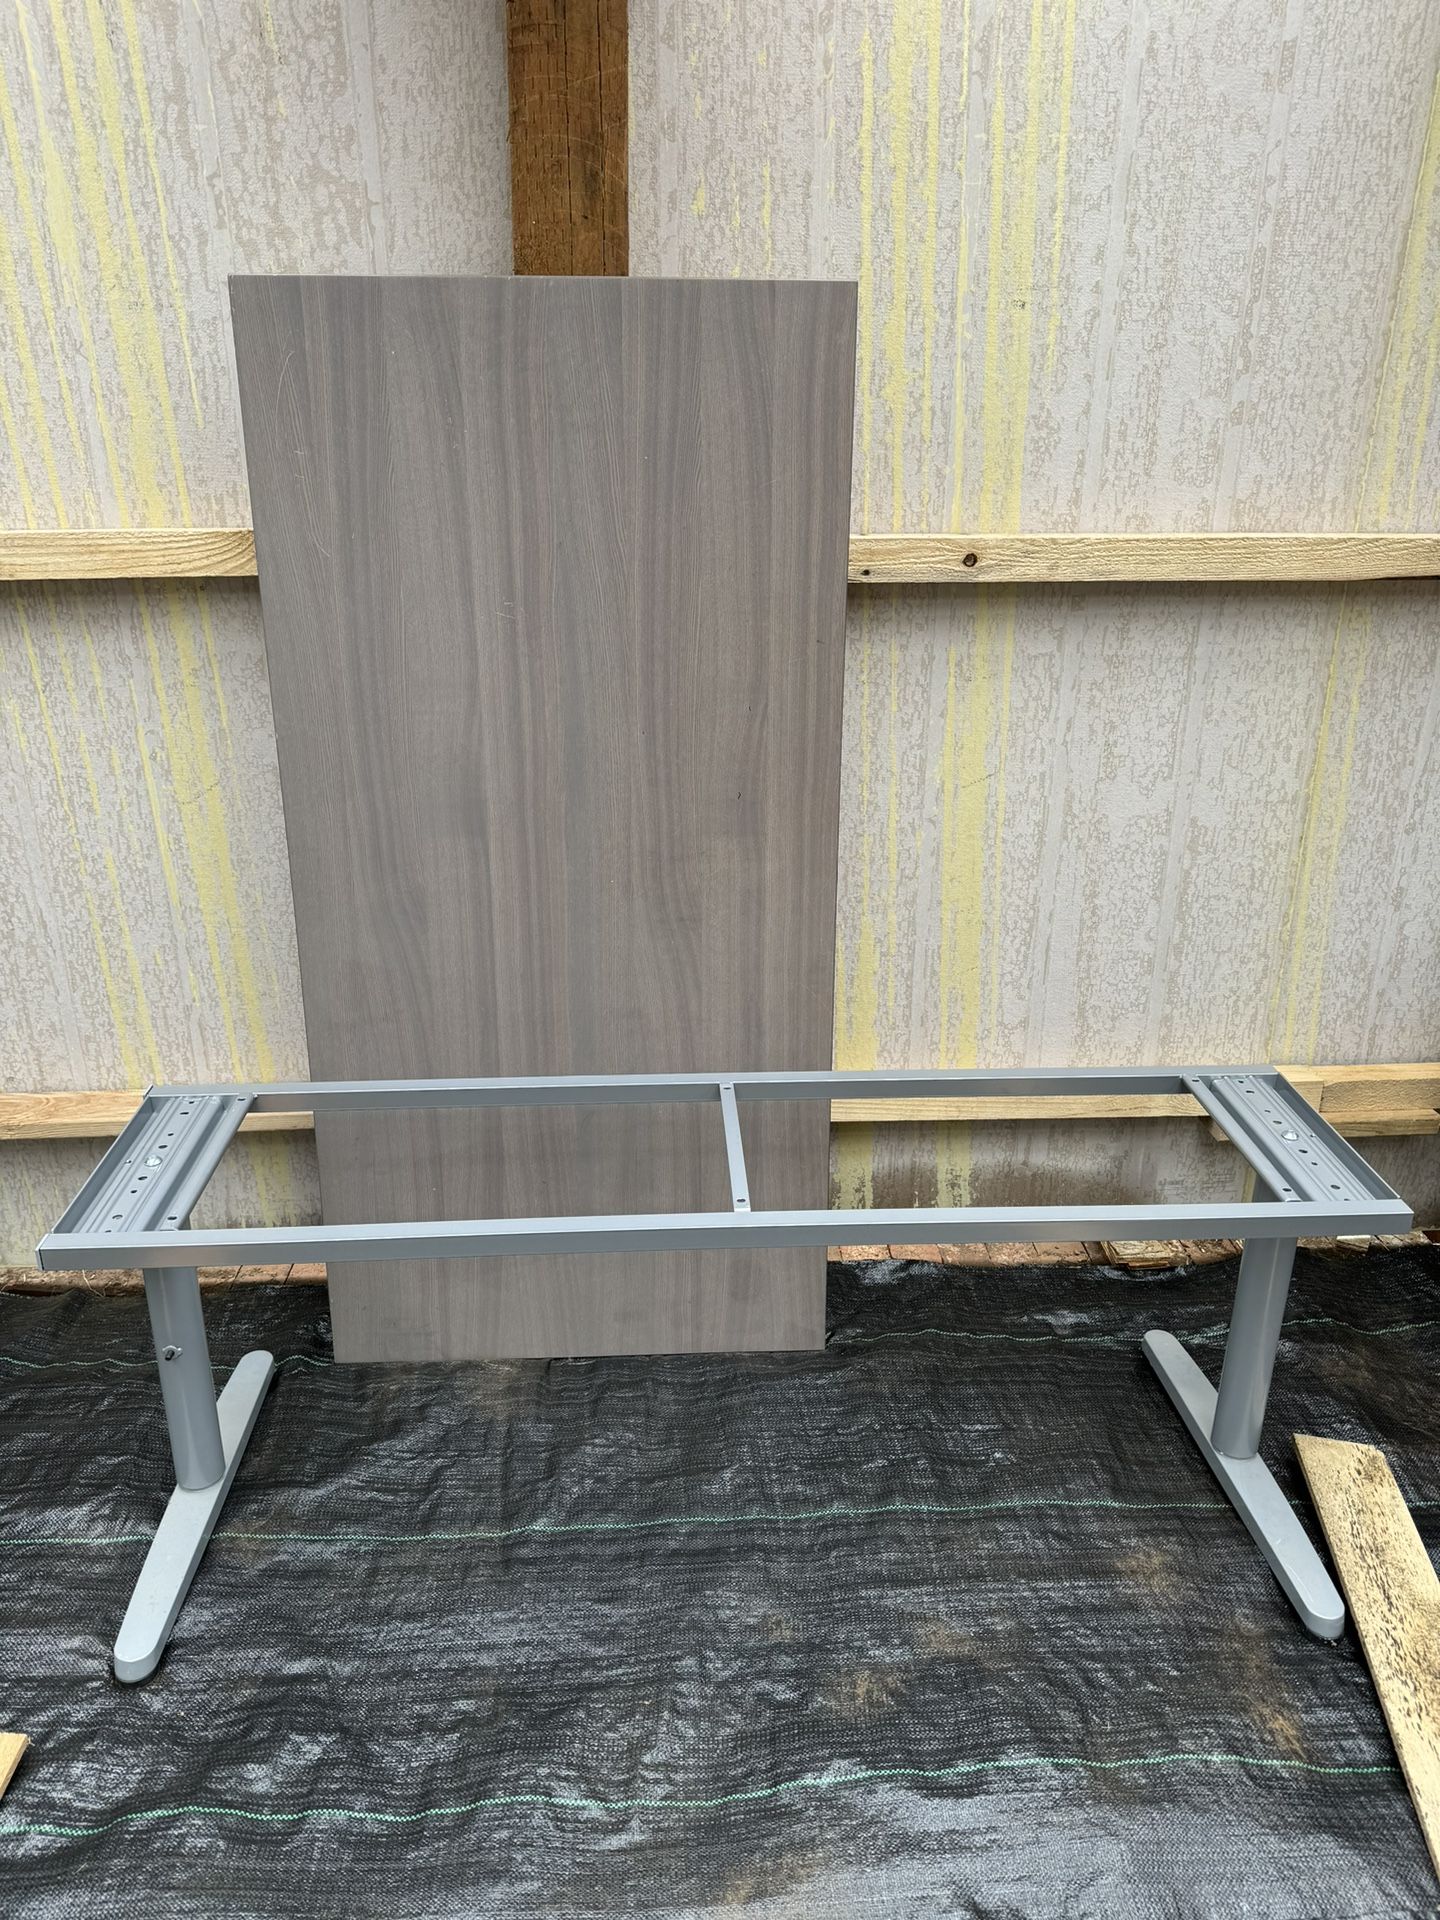 Heavy Duty Table（unassembled）